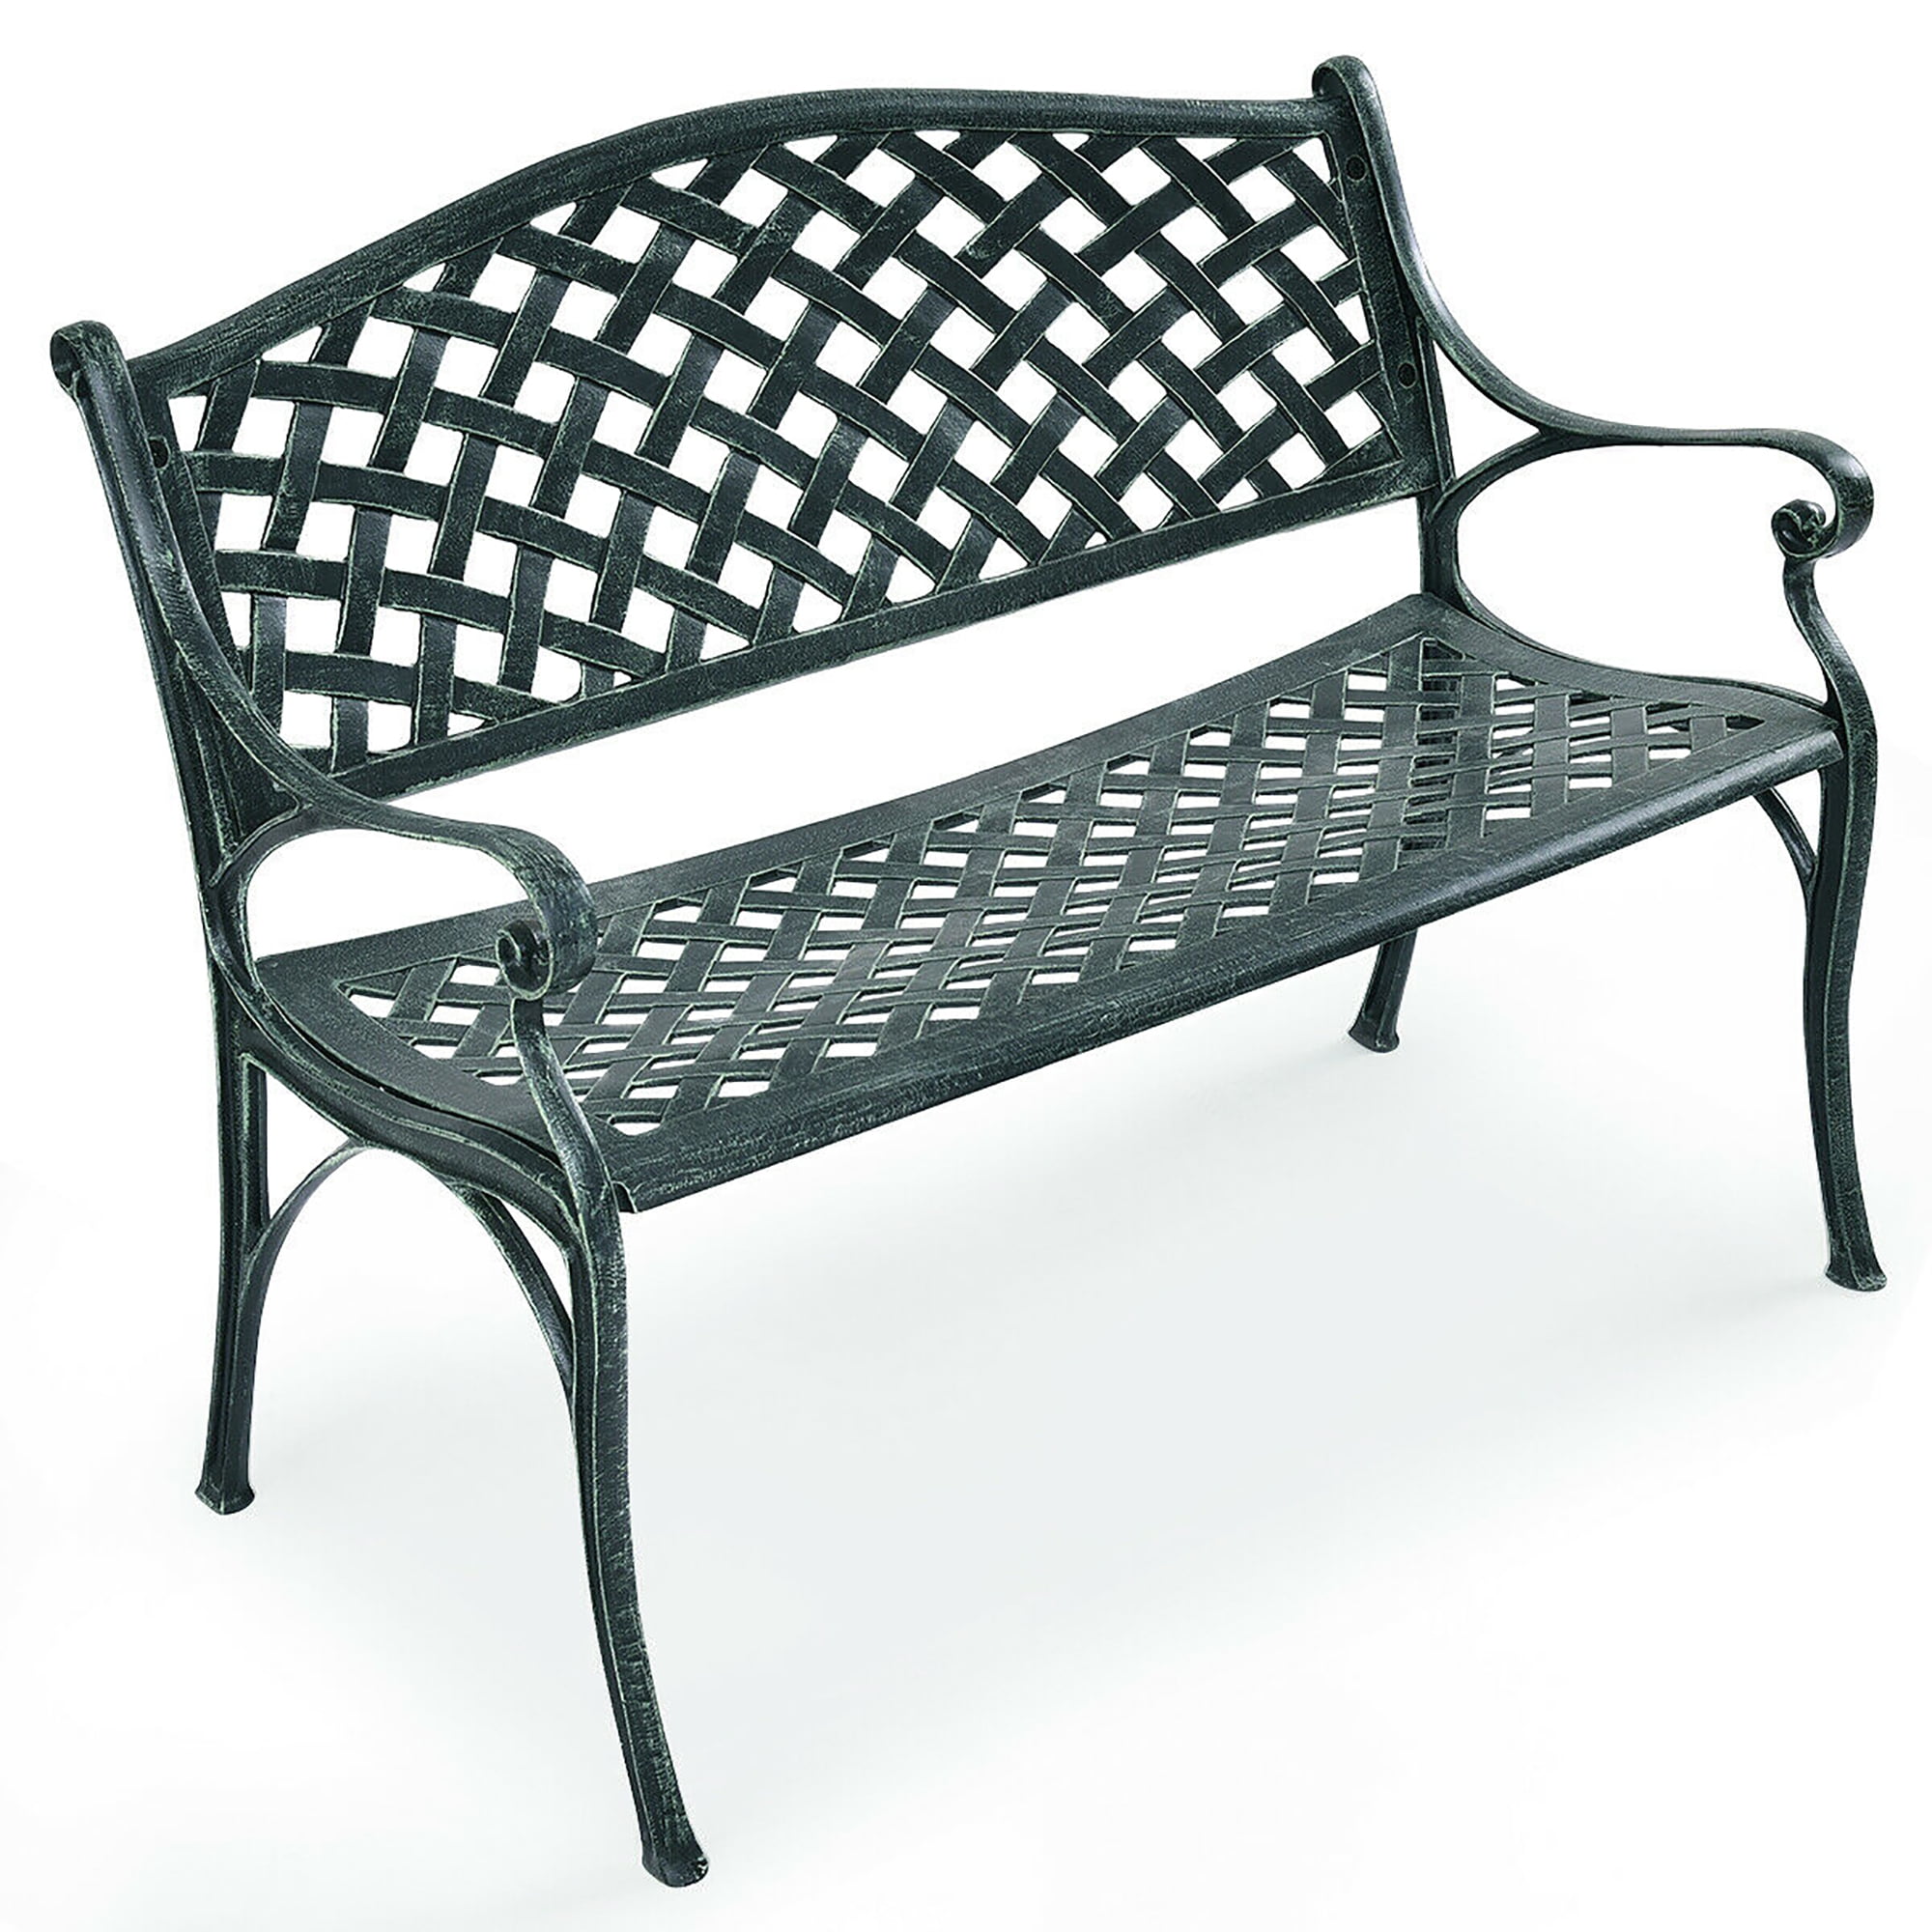 Outdoor Patio Furniture Bench Garden Bench Seat with Metal Frame 